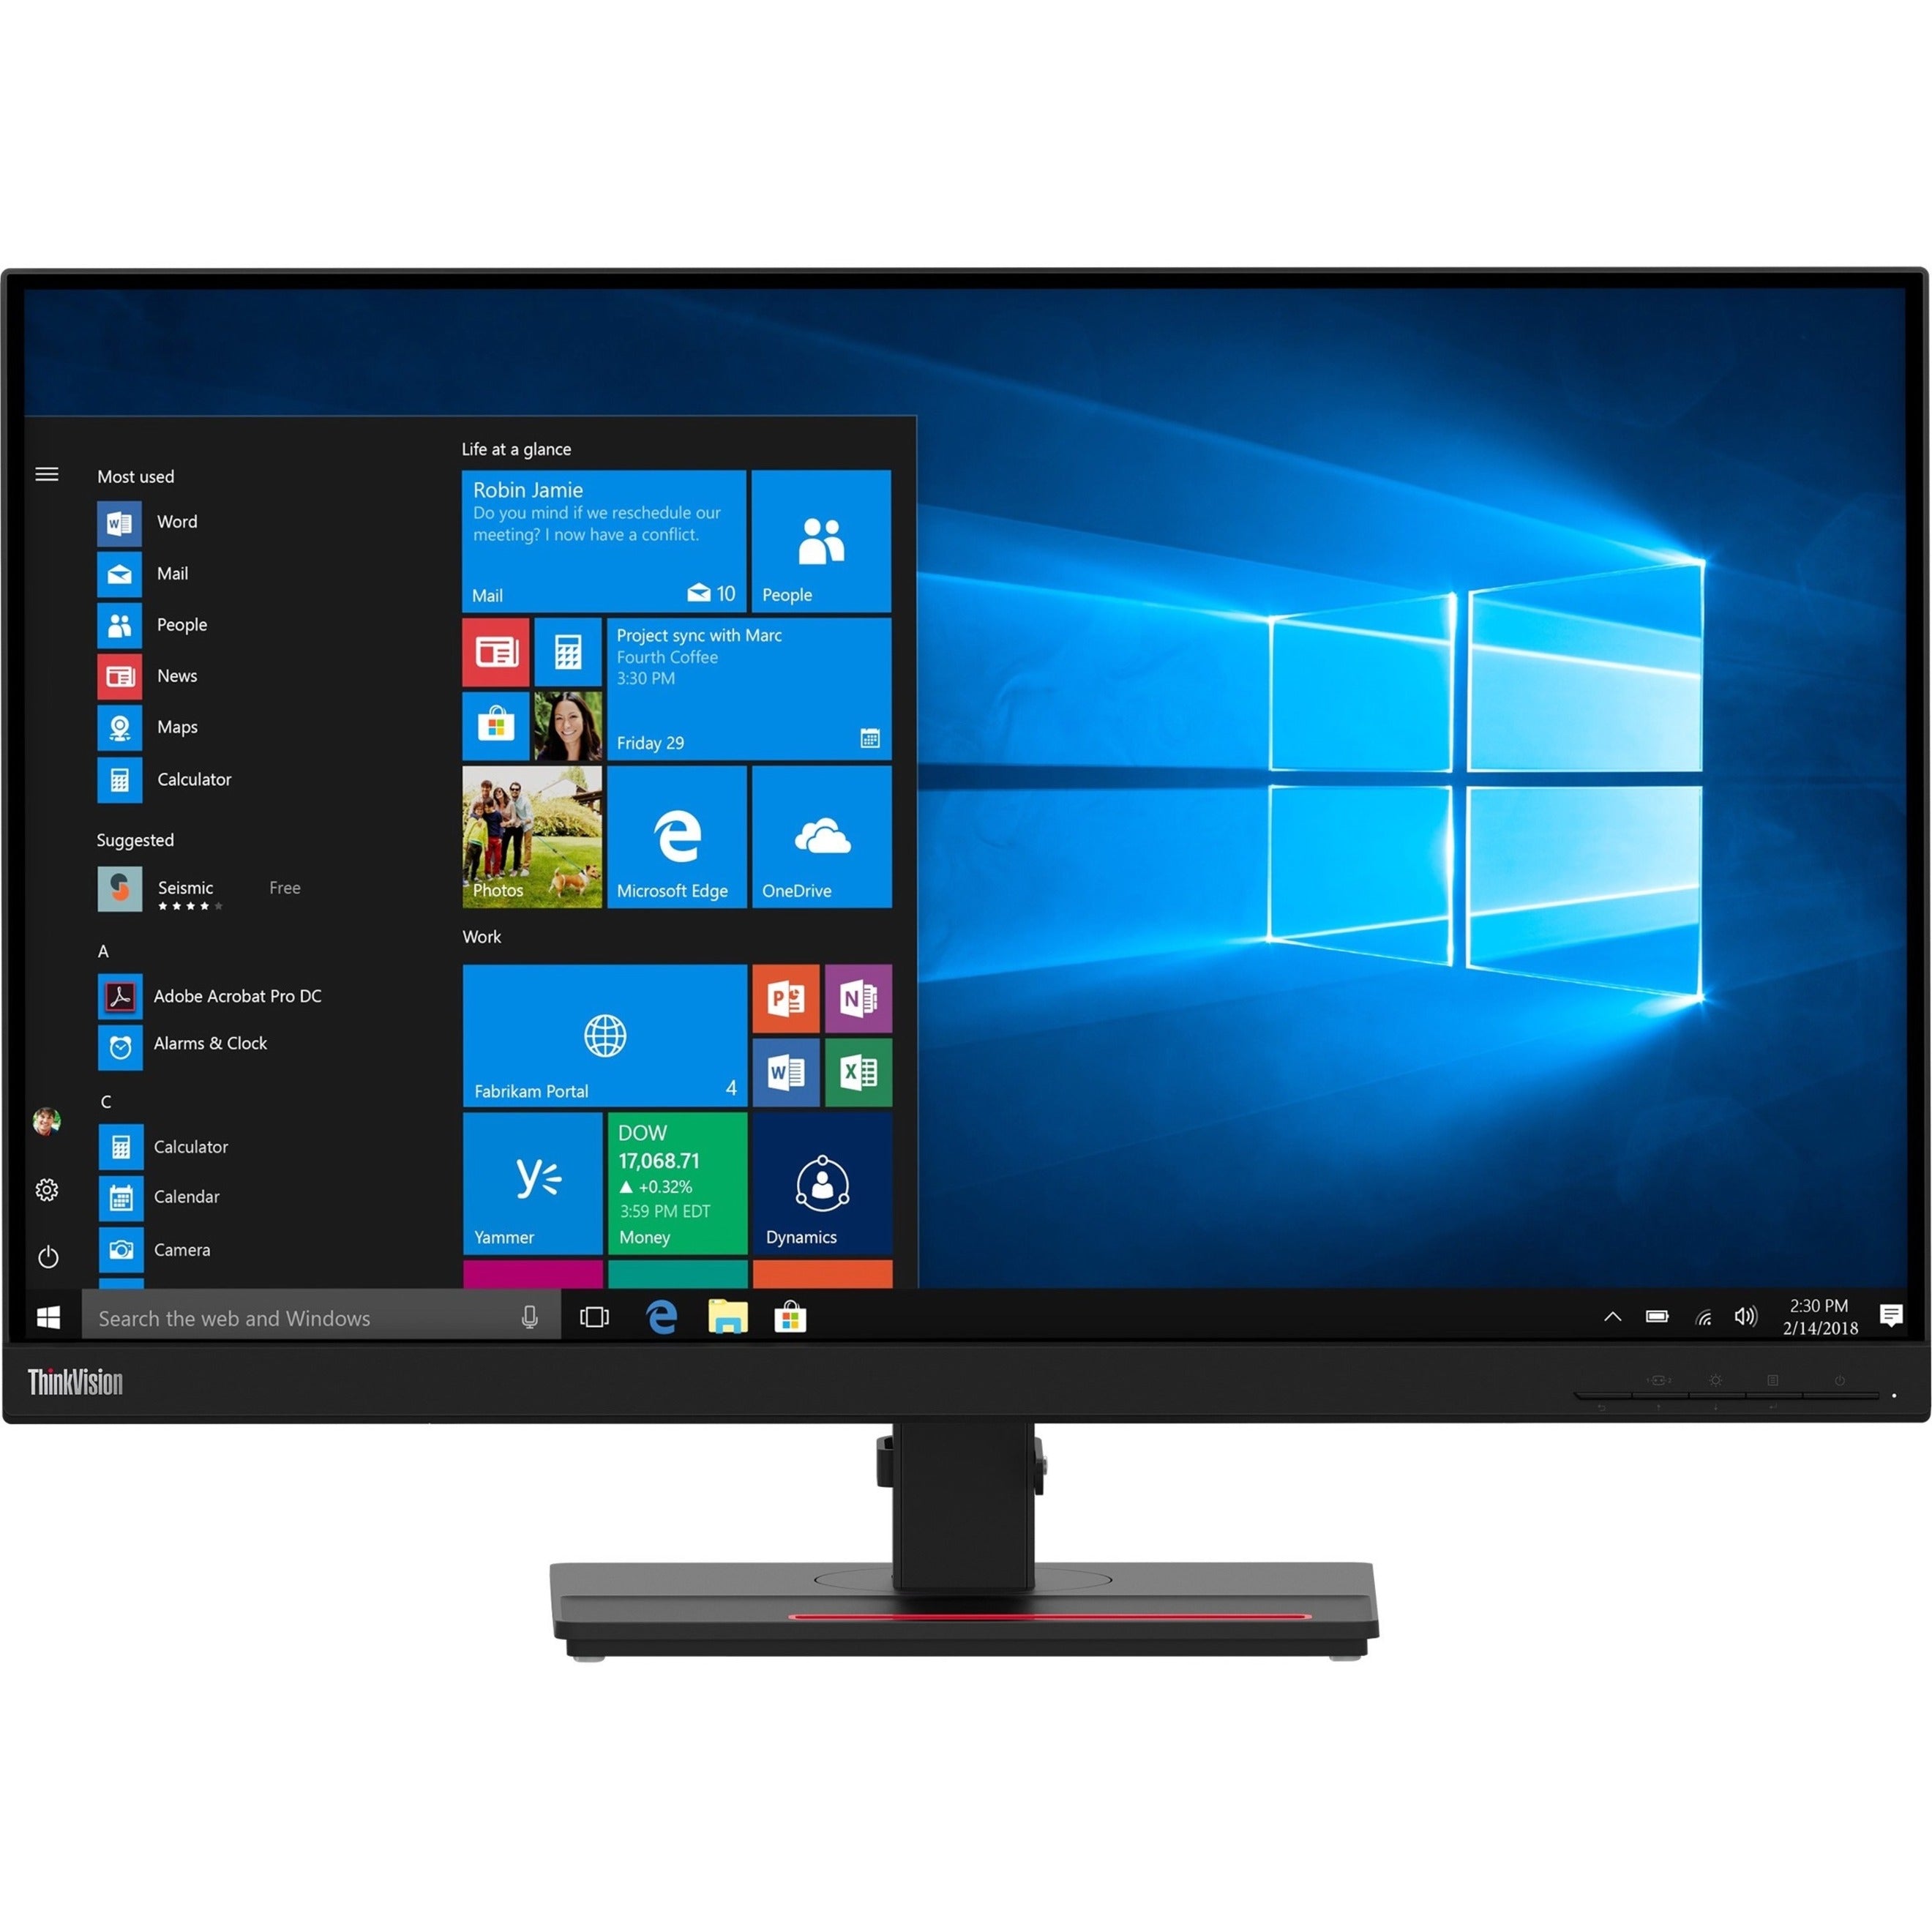 Lenovo ThinkVision T27h-2L Widescreen LCD Monitor - 27 inch, HDMI [Discontinued]